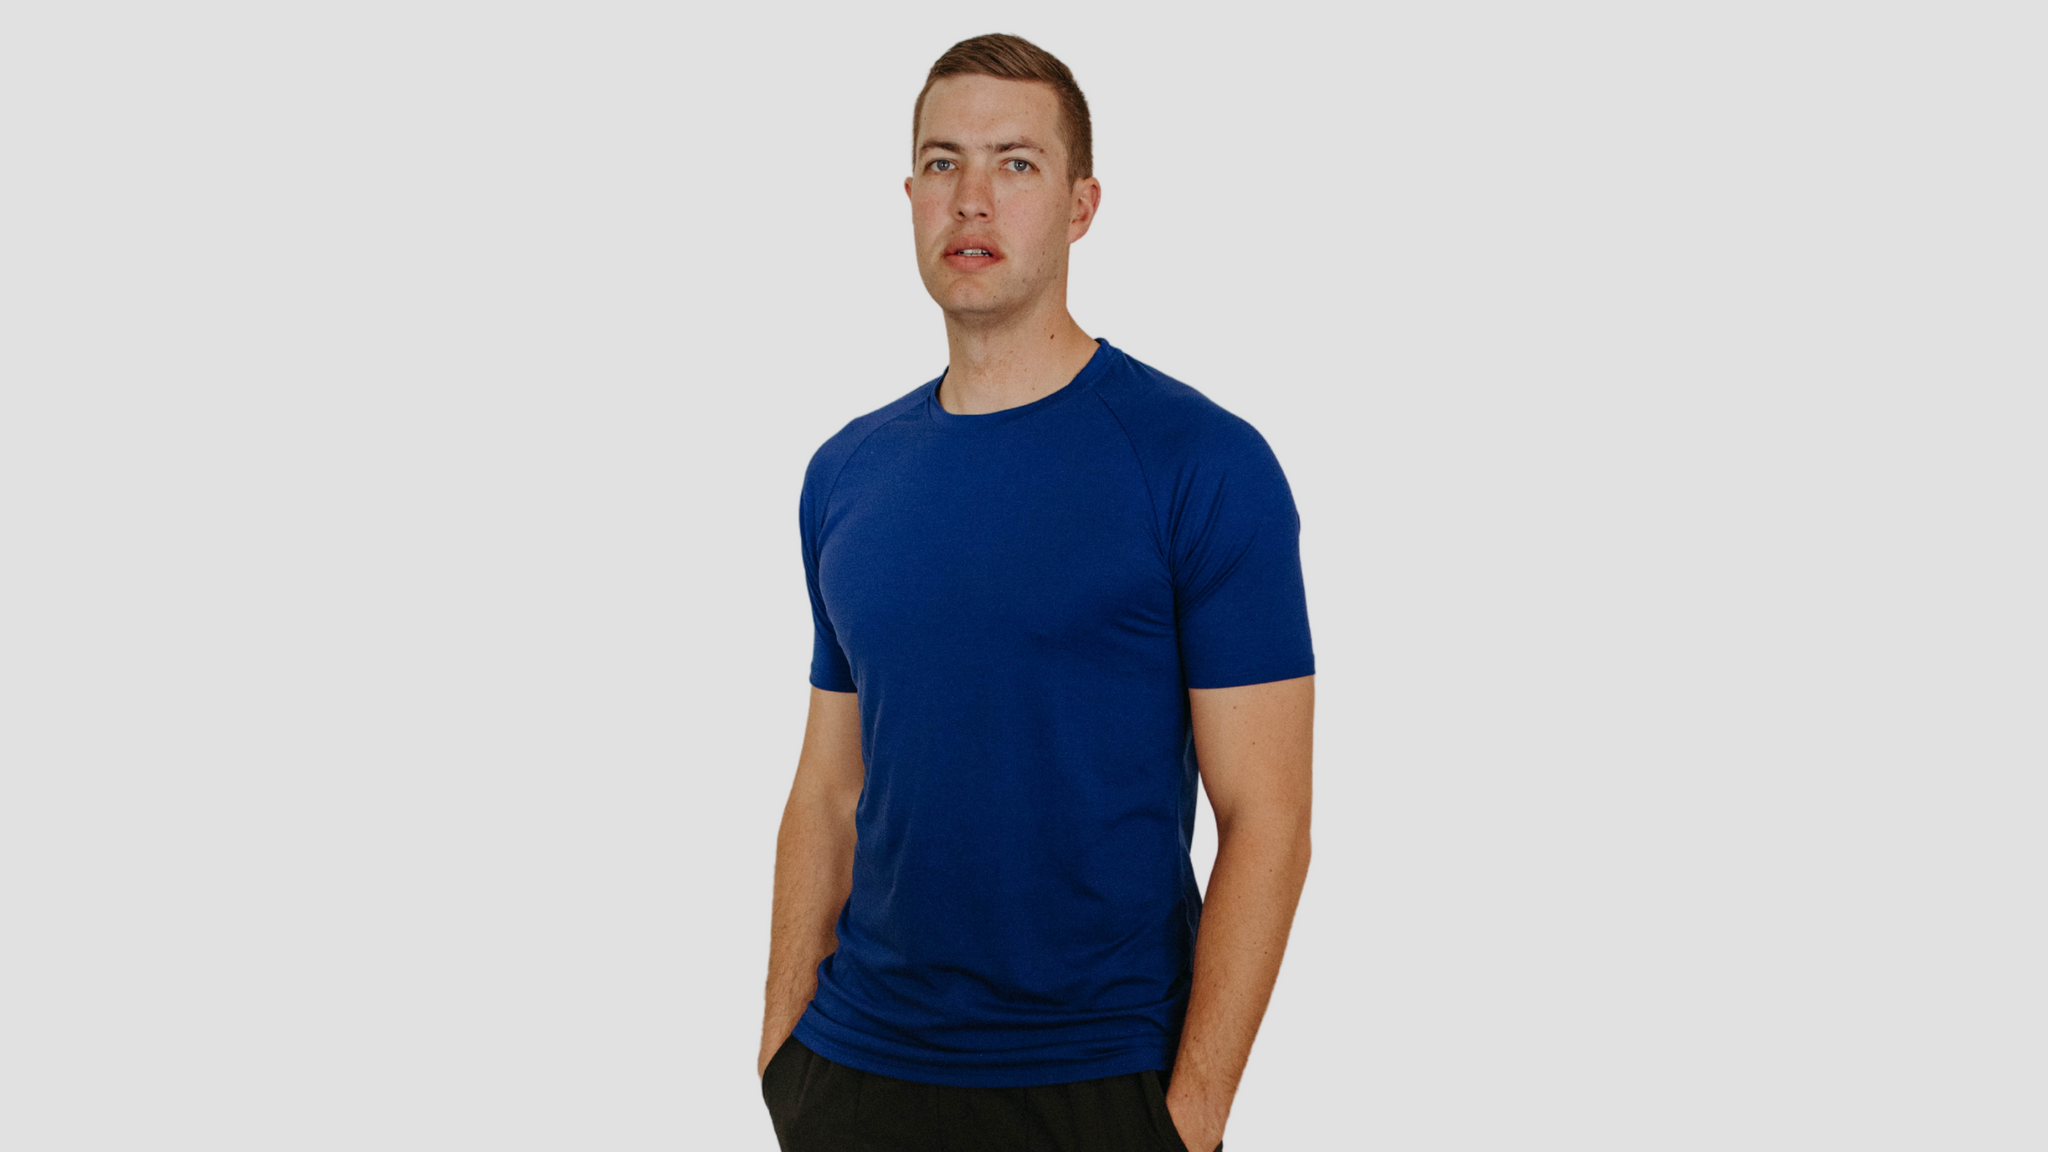 Tall Guy Wearing Tall Athletic Shirt